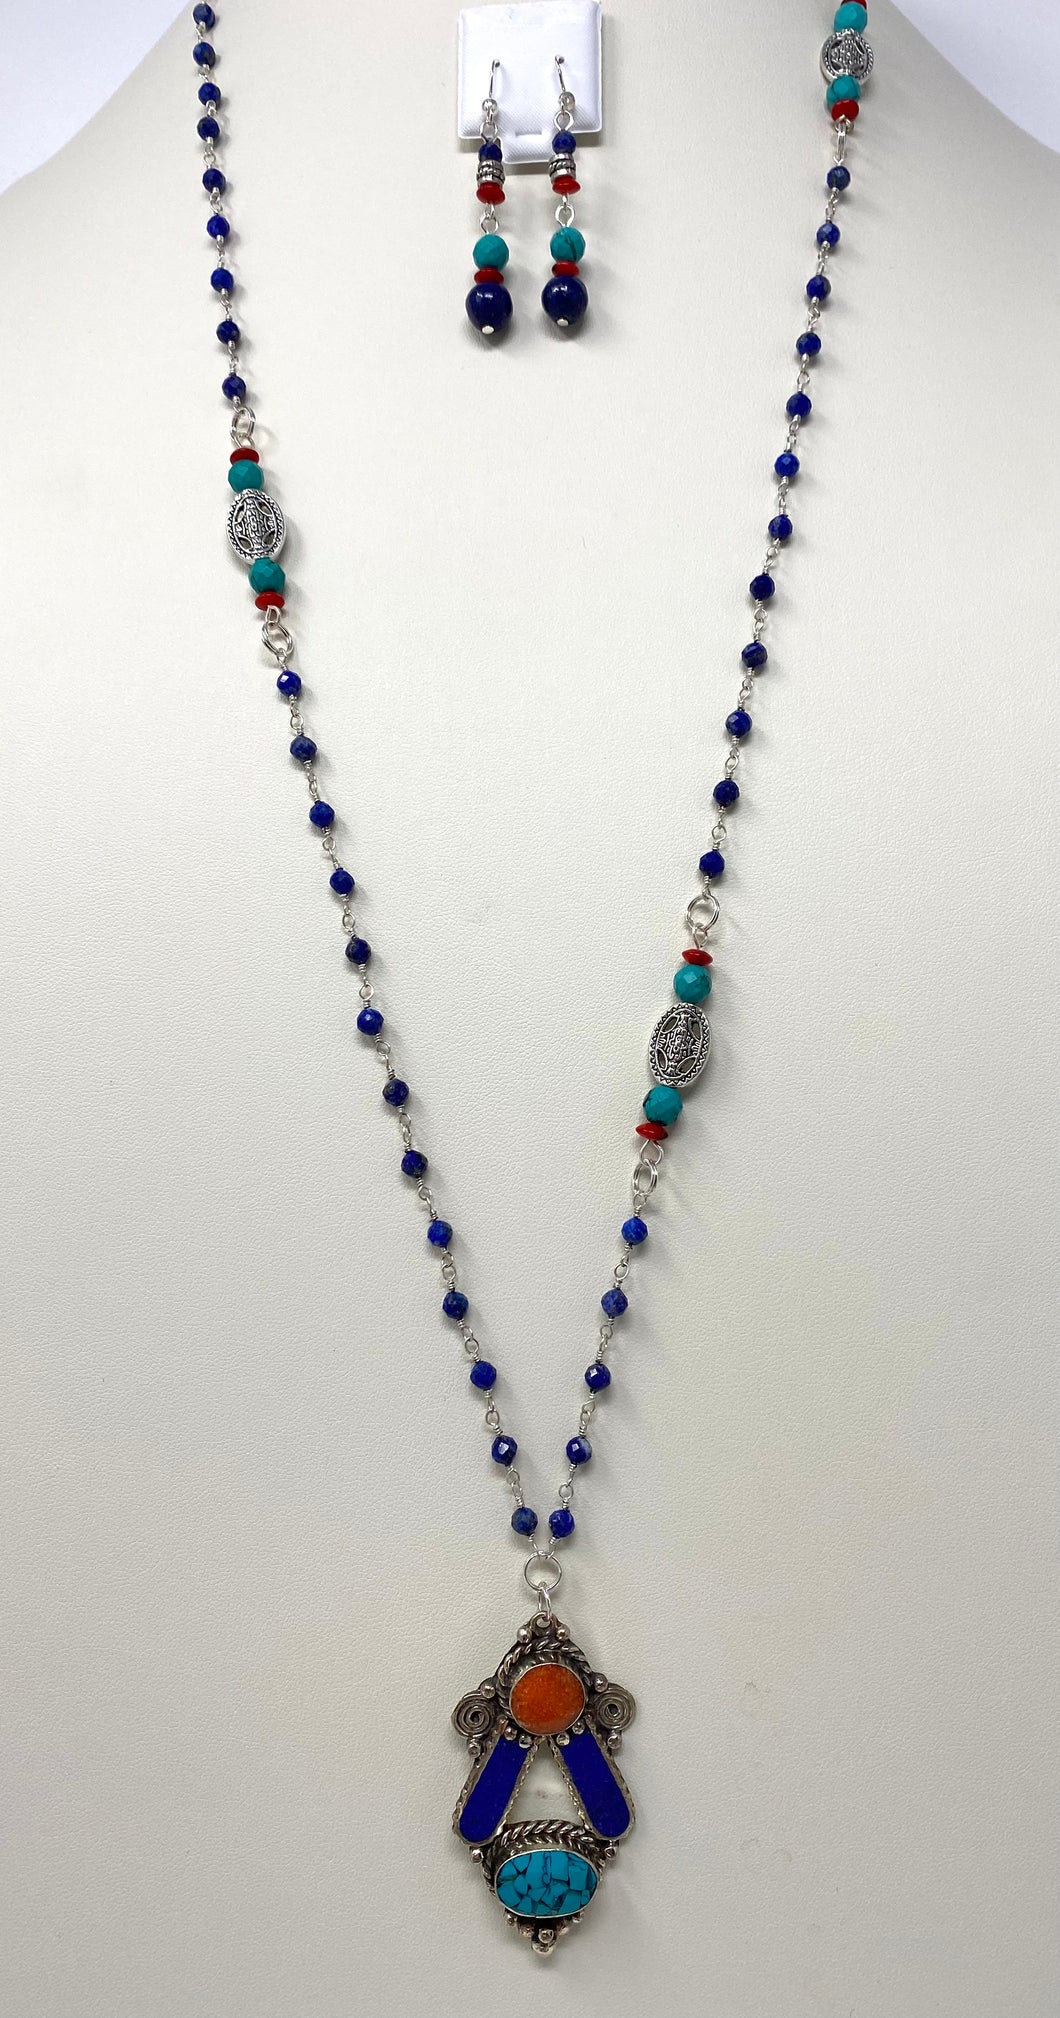 Turquoise, Coral and Lapis